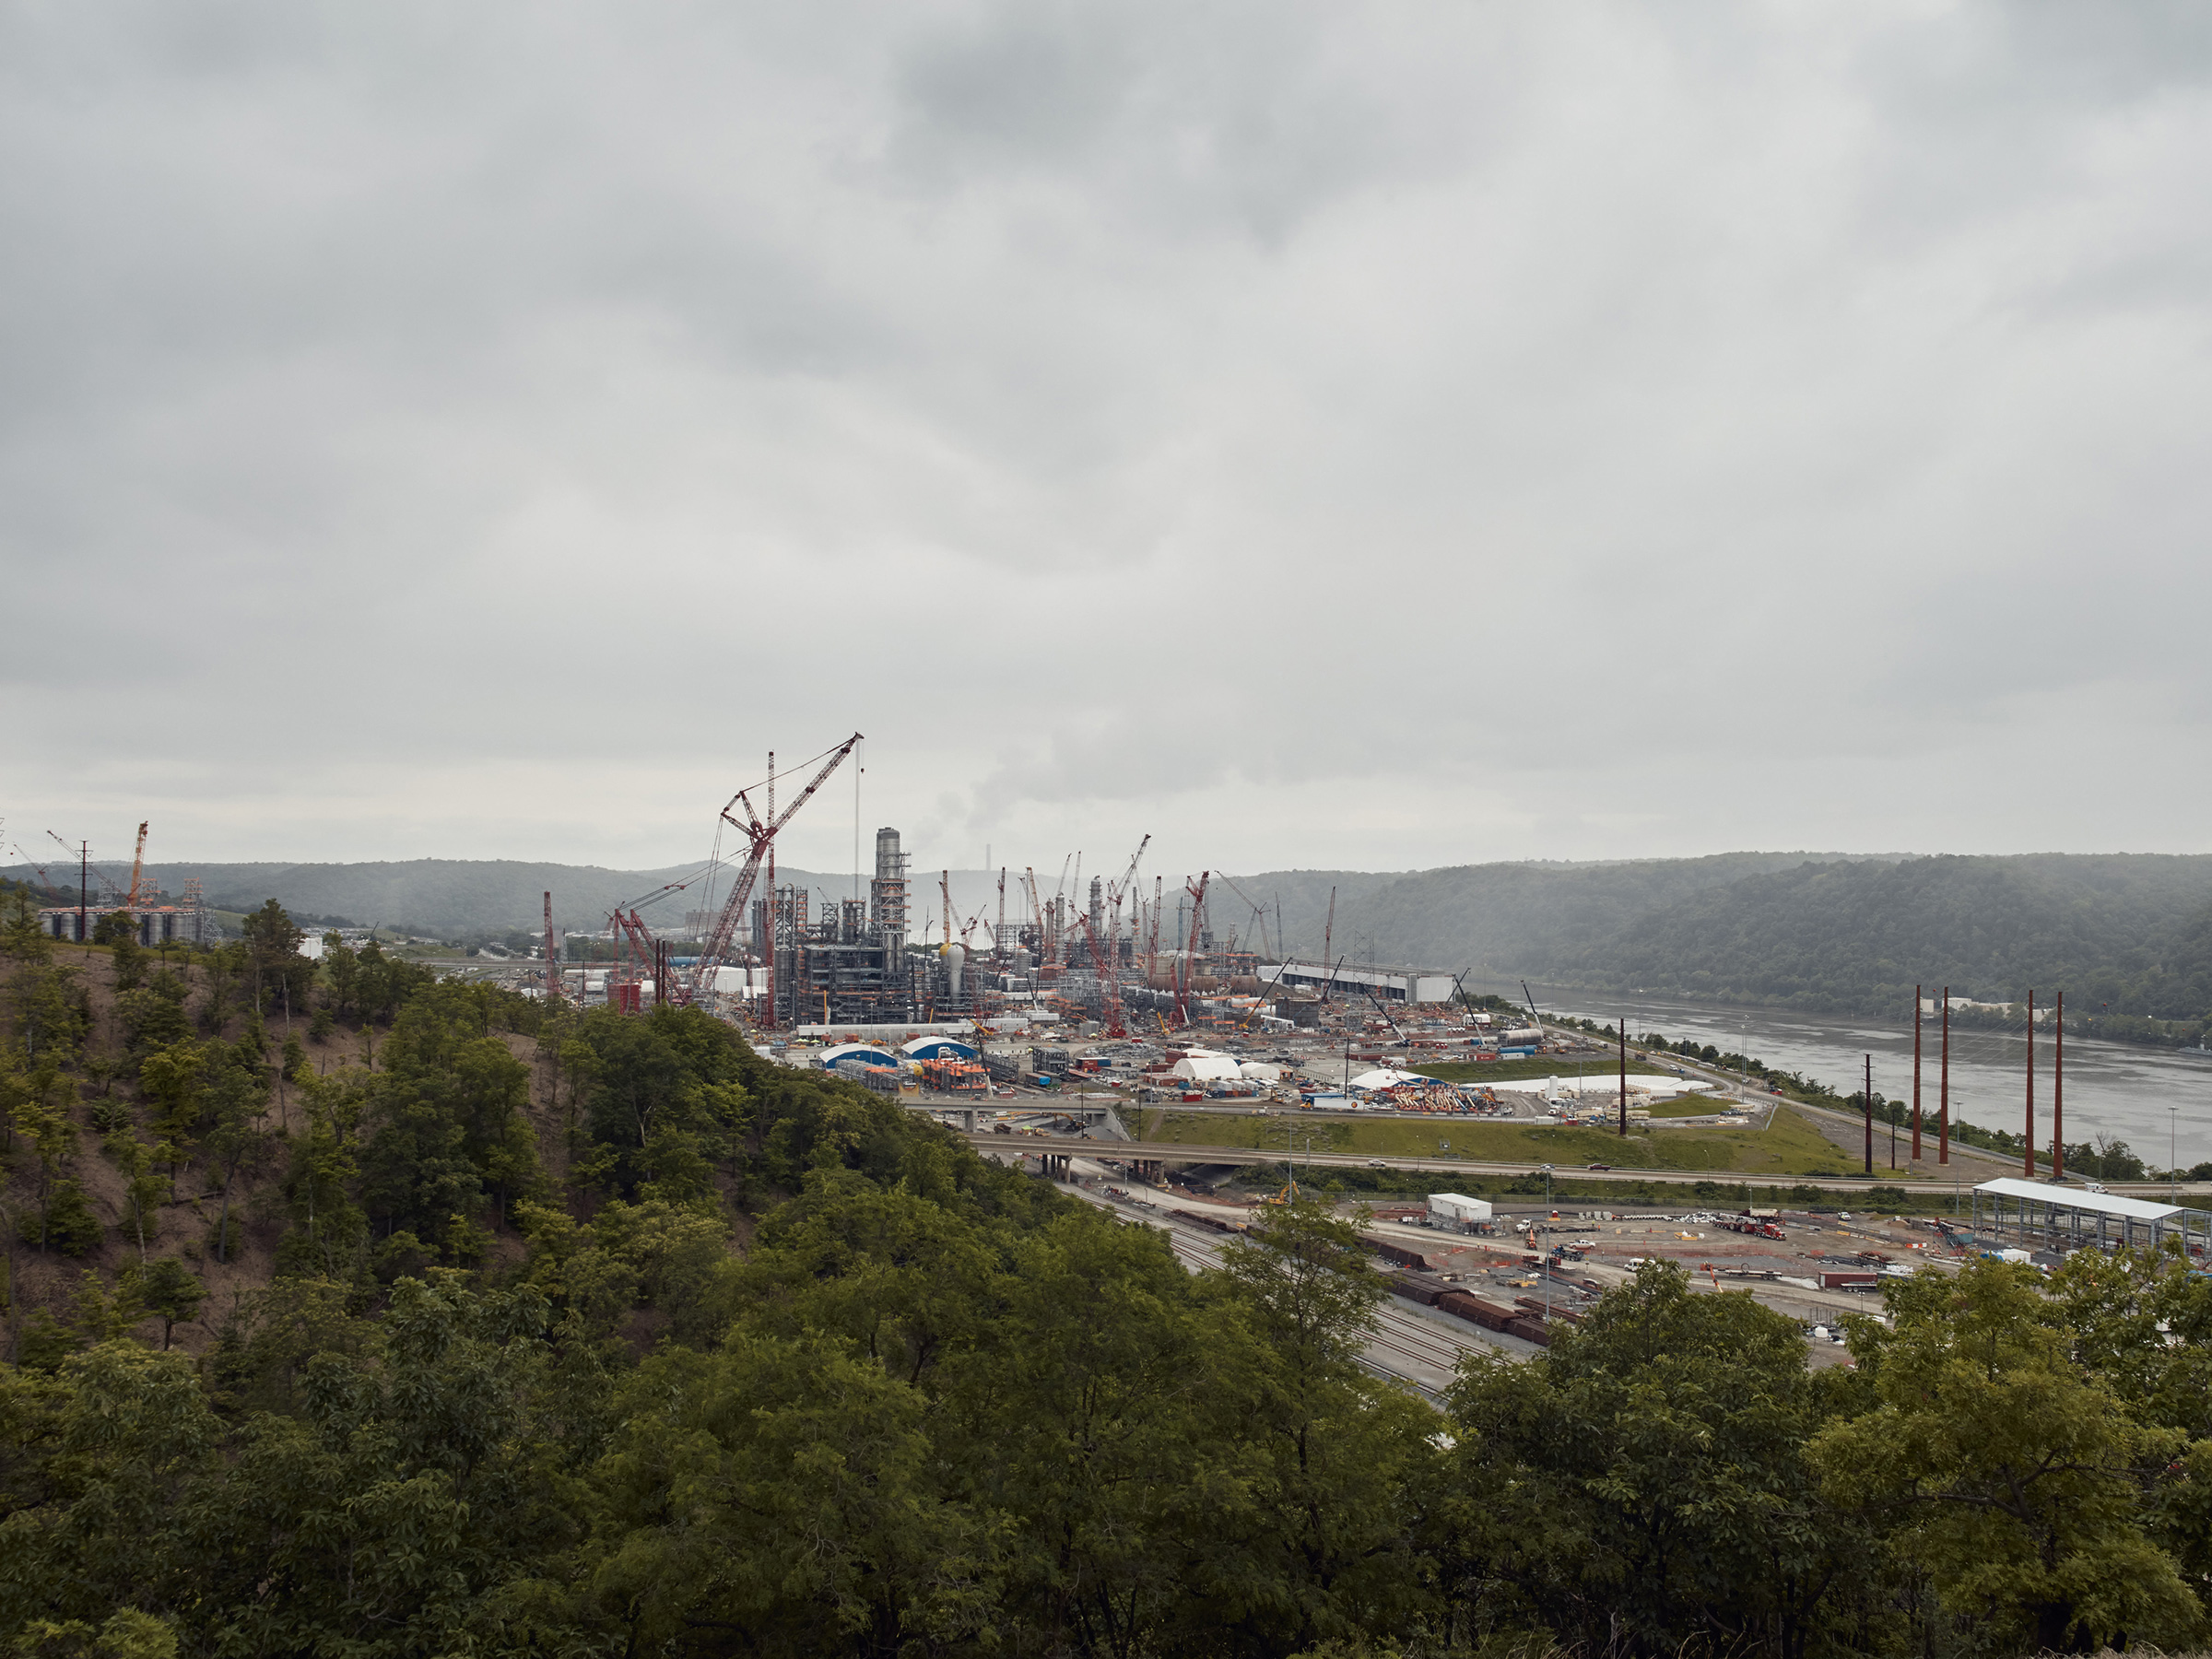 A $6 billion Shell plastics facility is currently under construction outside of Pittsburgh (Ross Mantle—The New York Times/Redux)